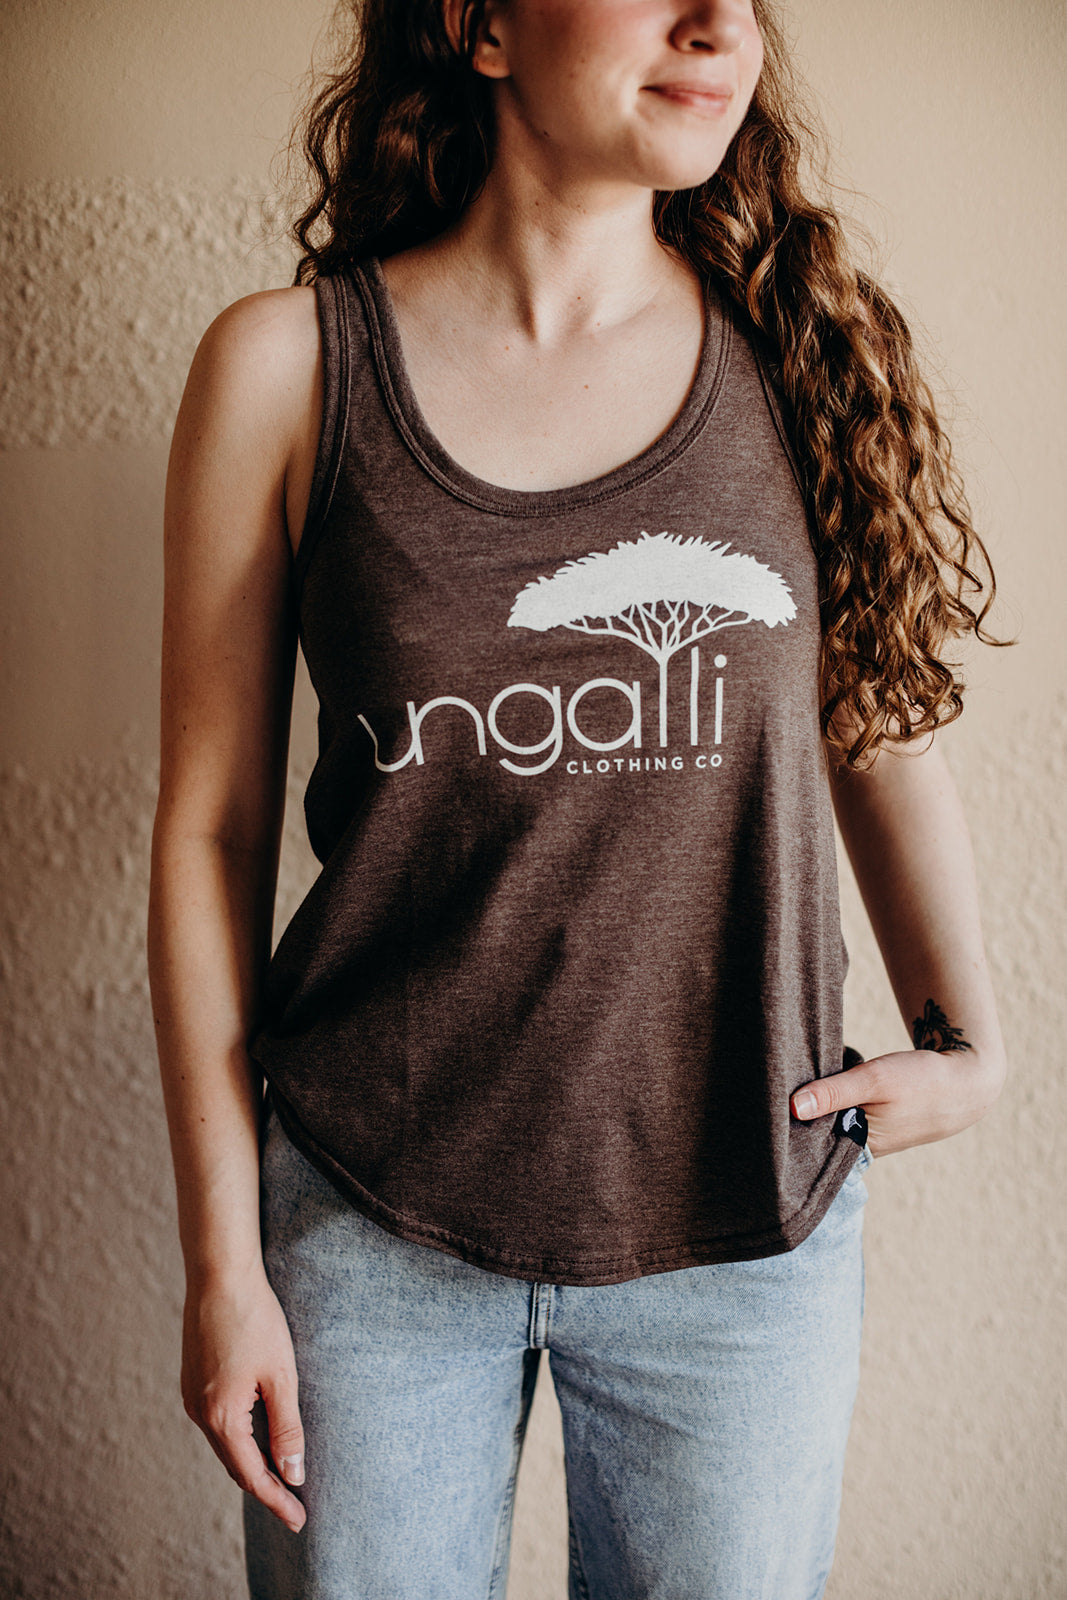 women's recycled brown tank top with white logo